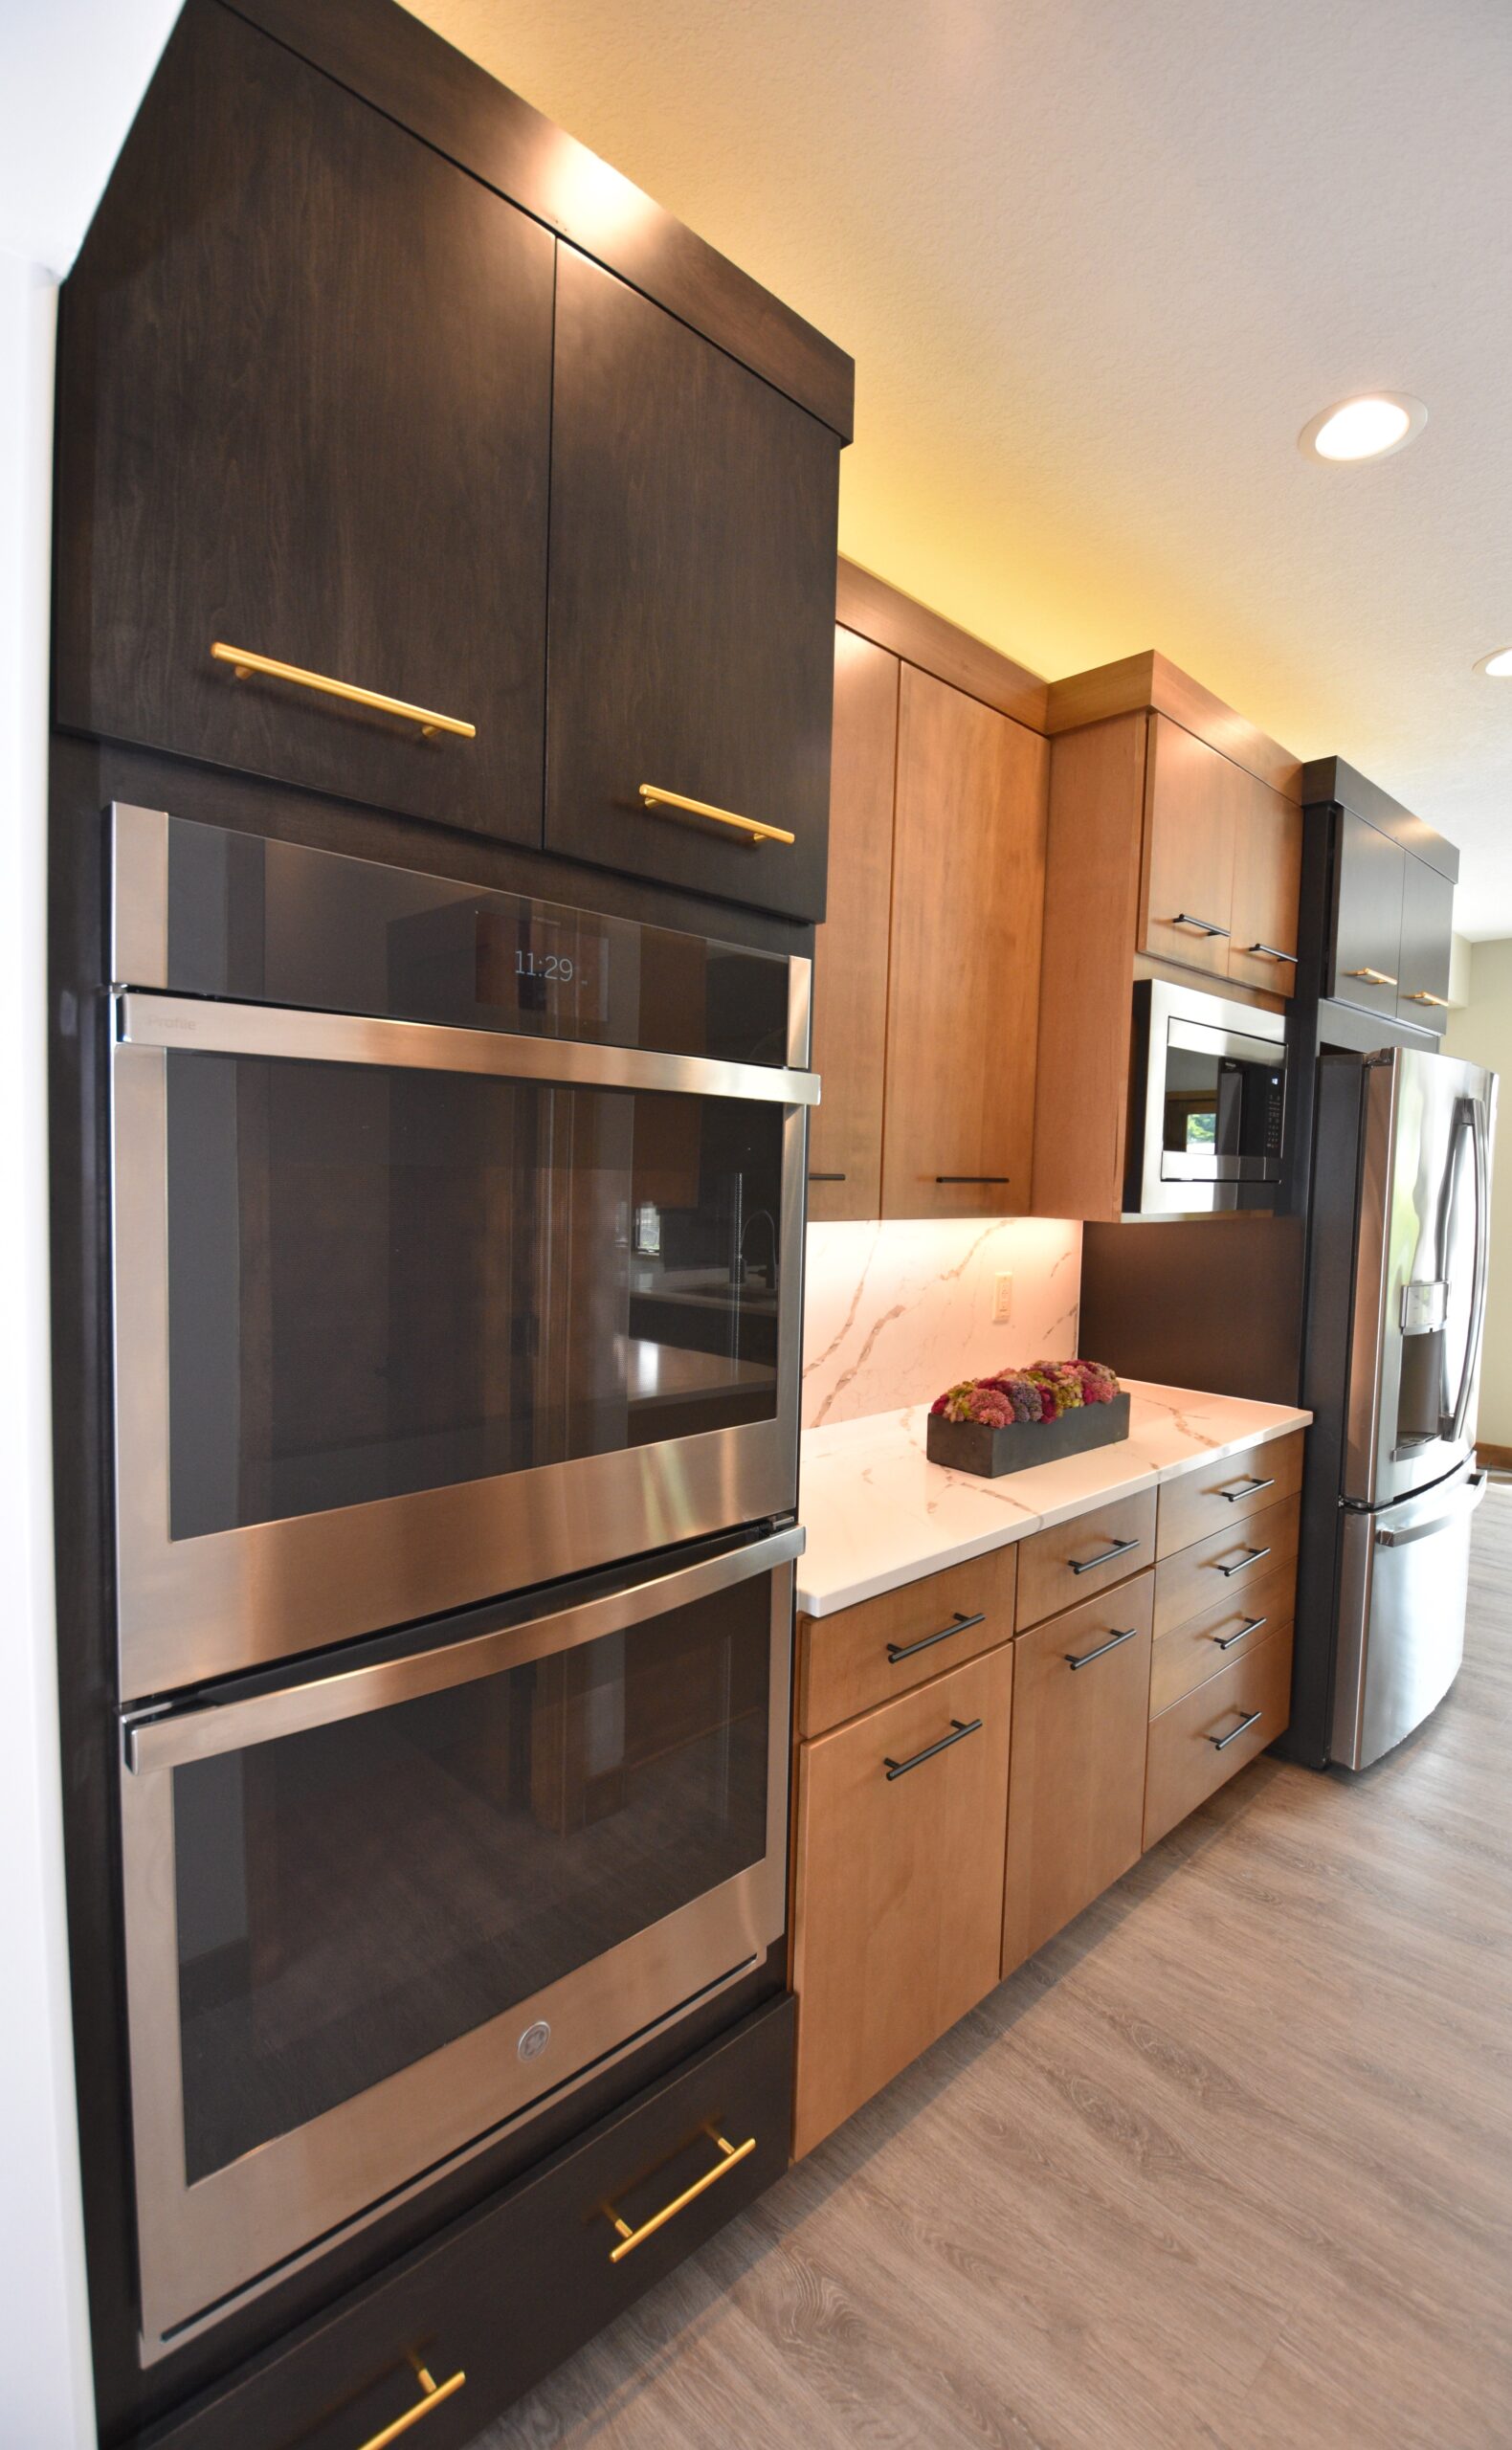 Contemporary Kitchen - View from double ovens